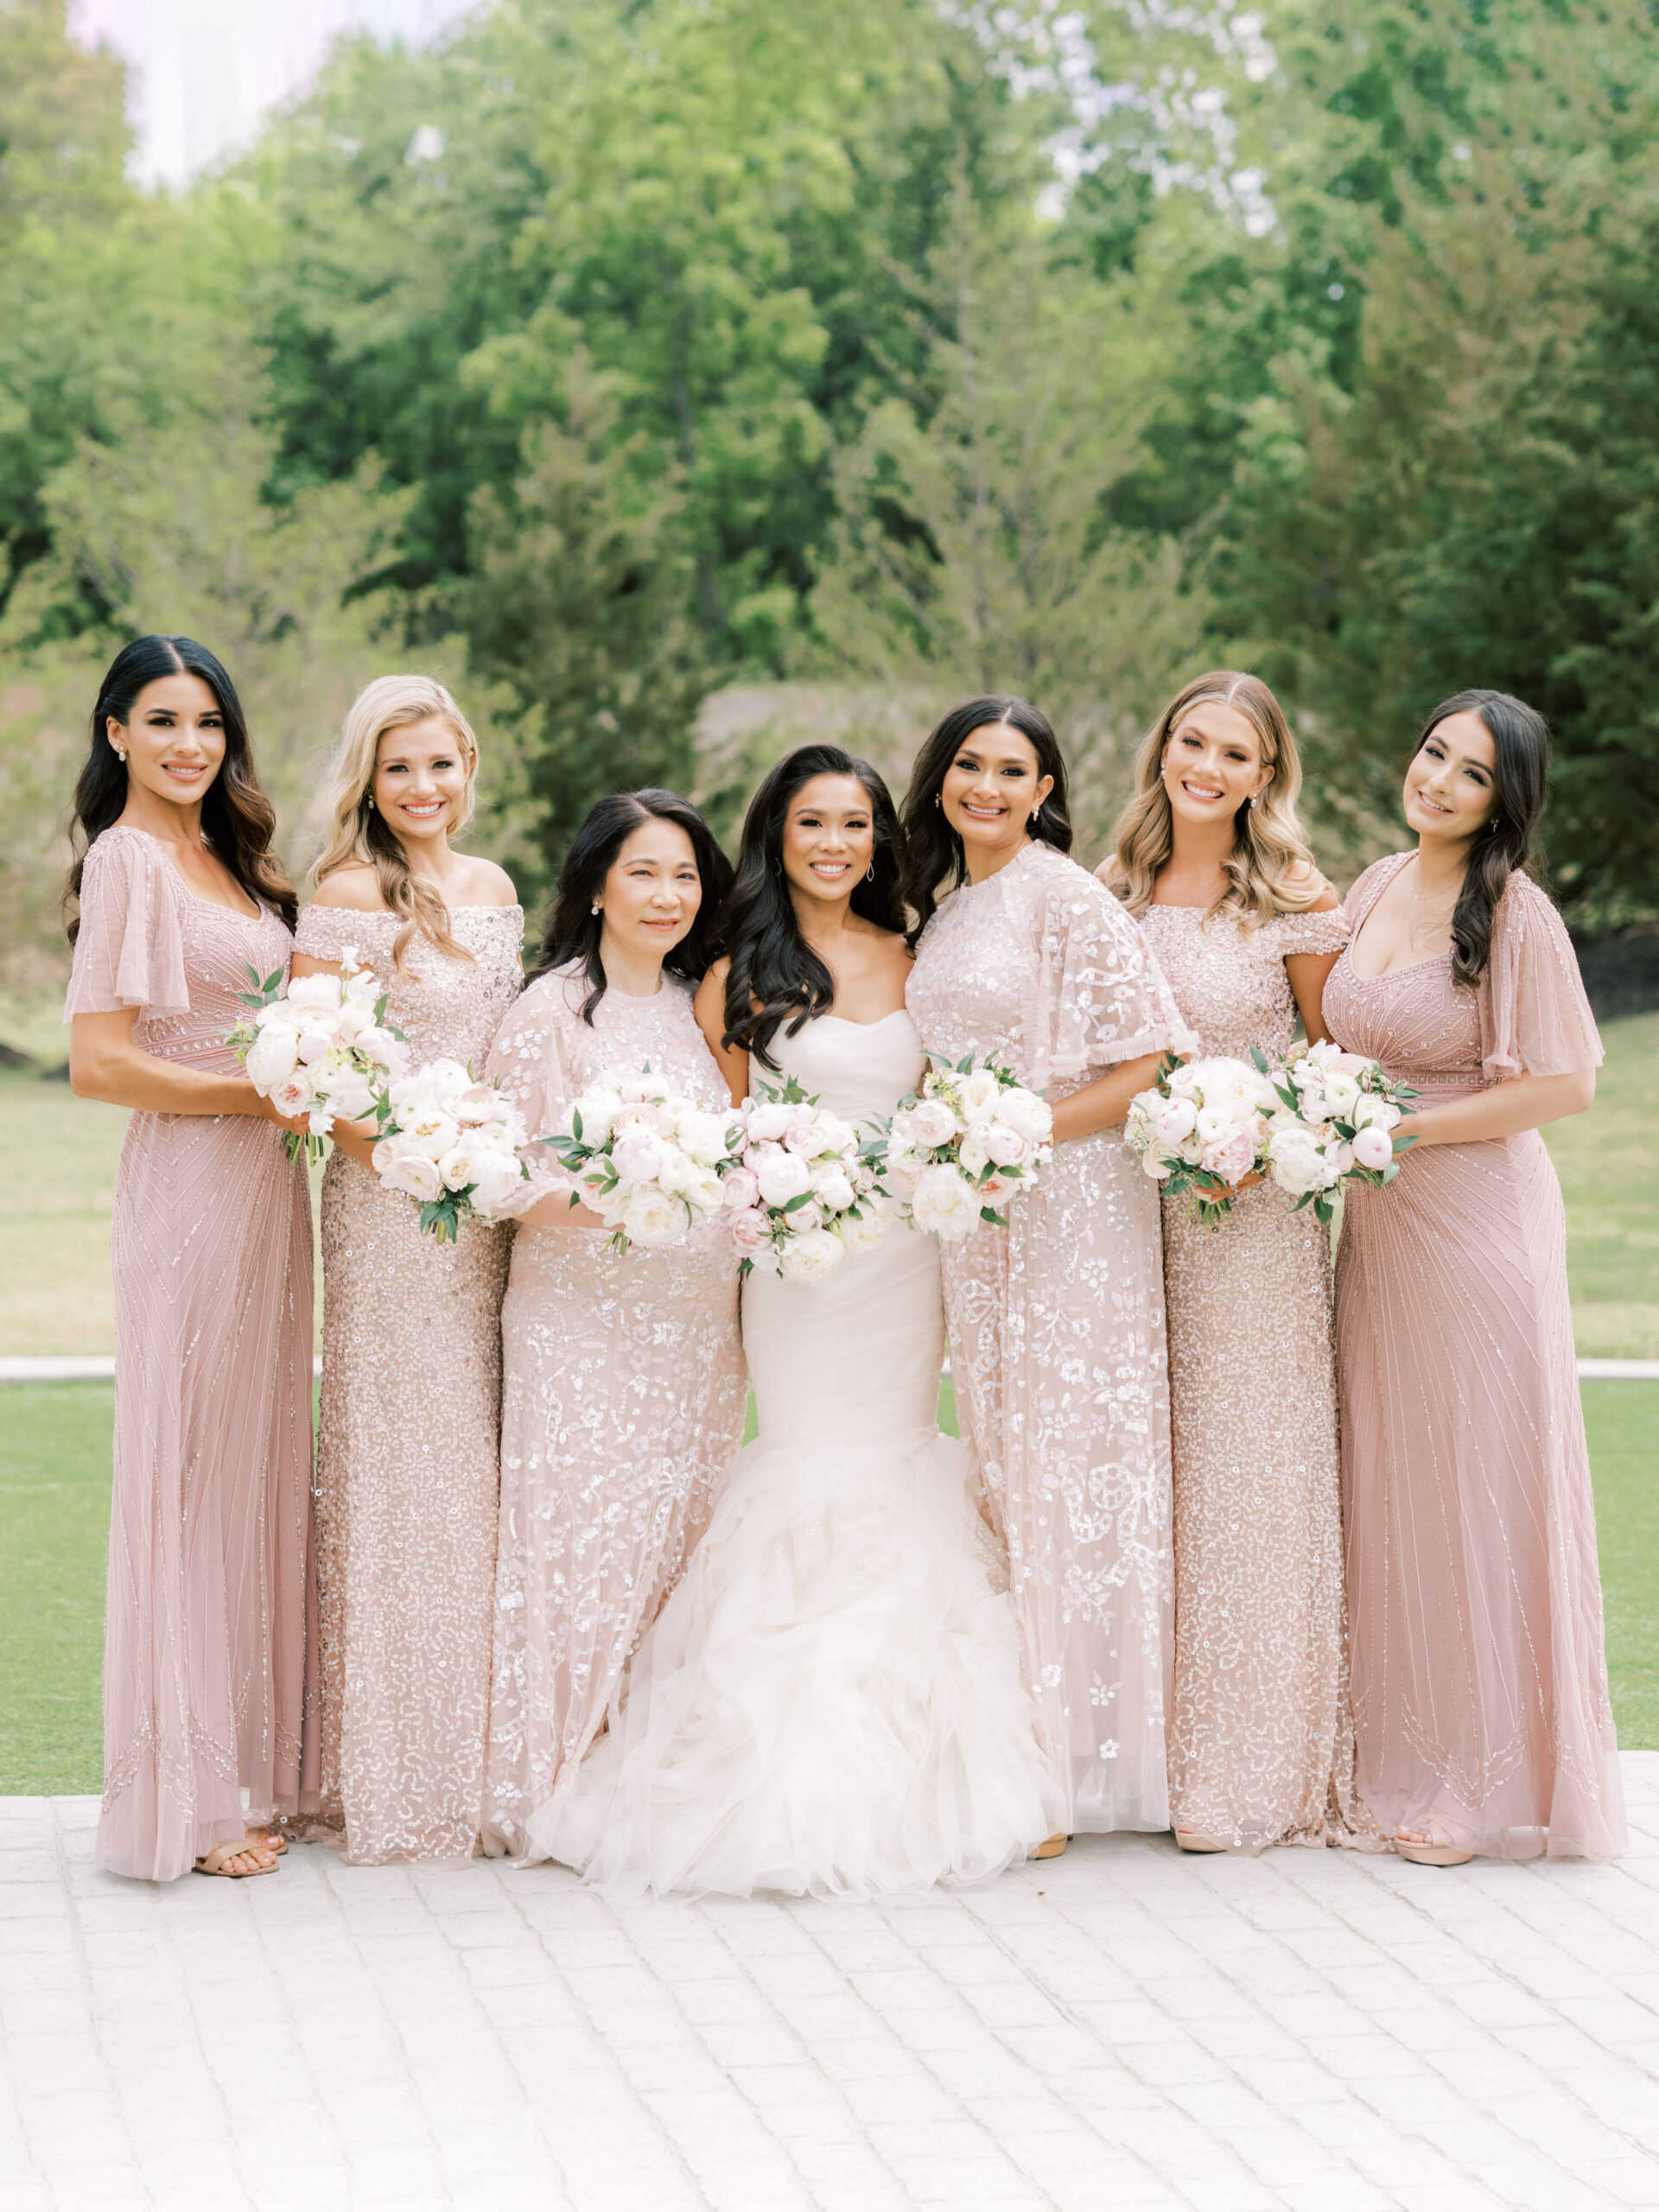 Mismatched Bridesmaid Dresses, Our How to Guide